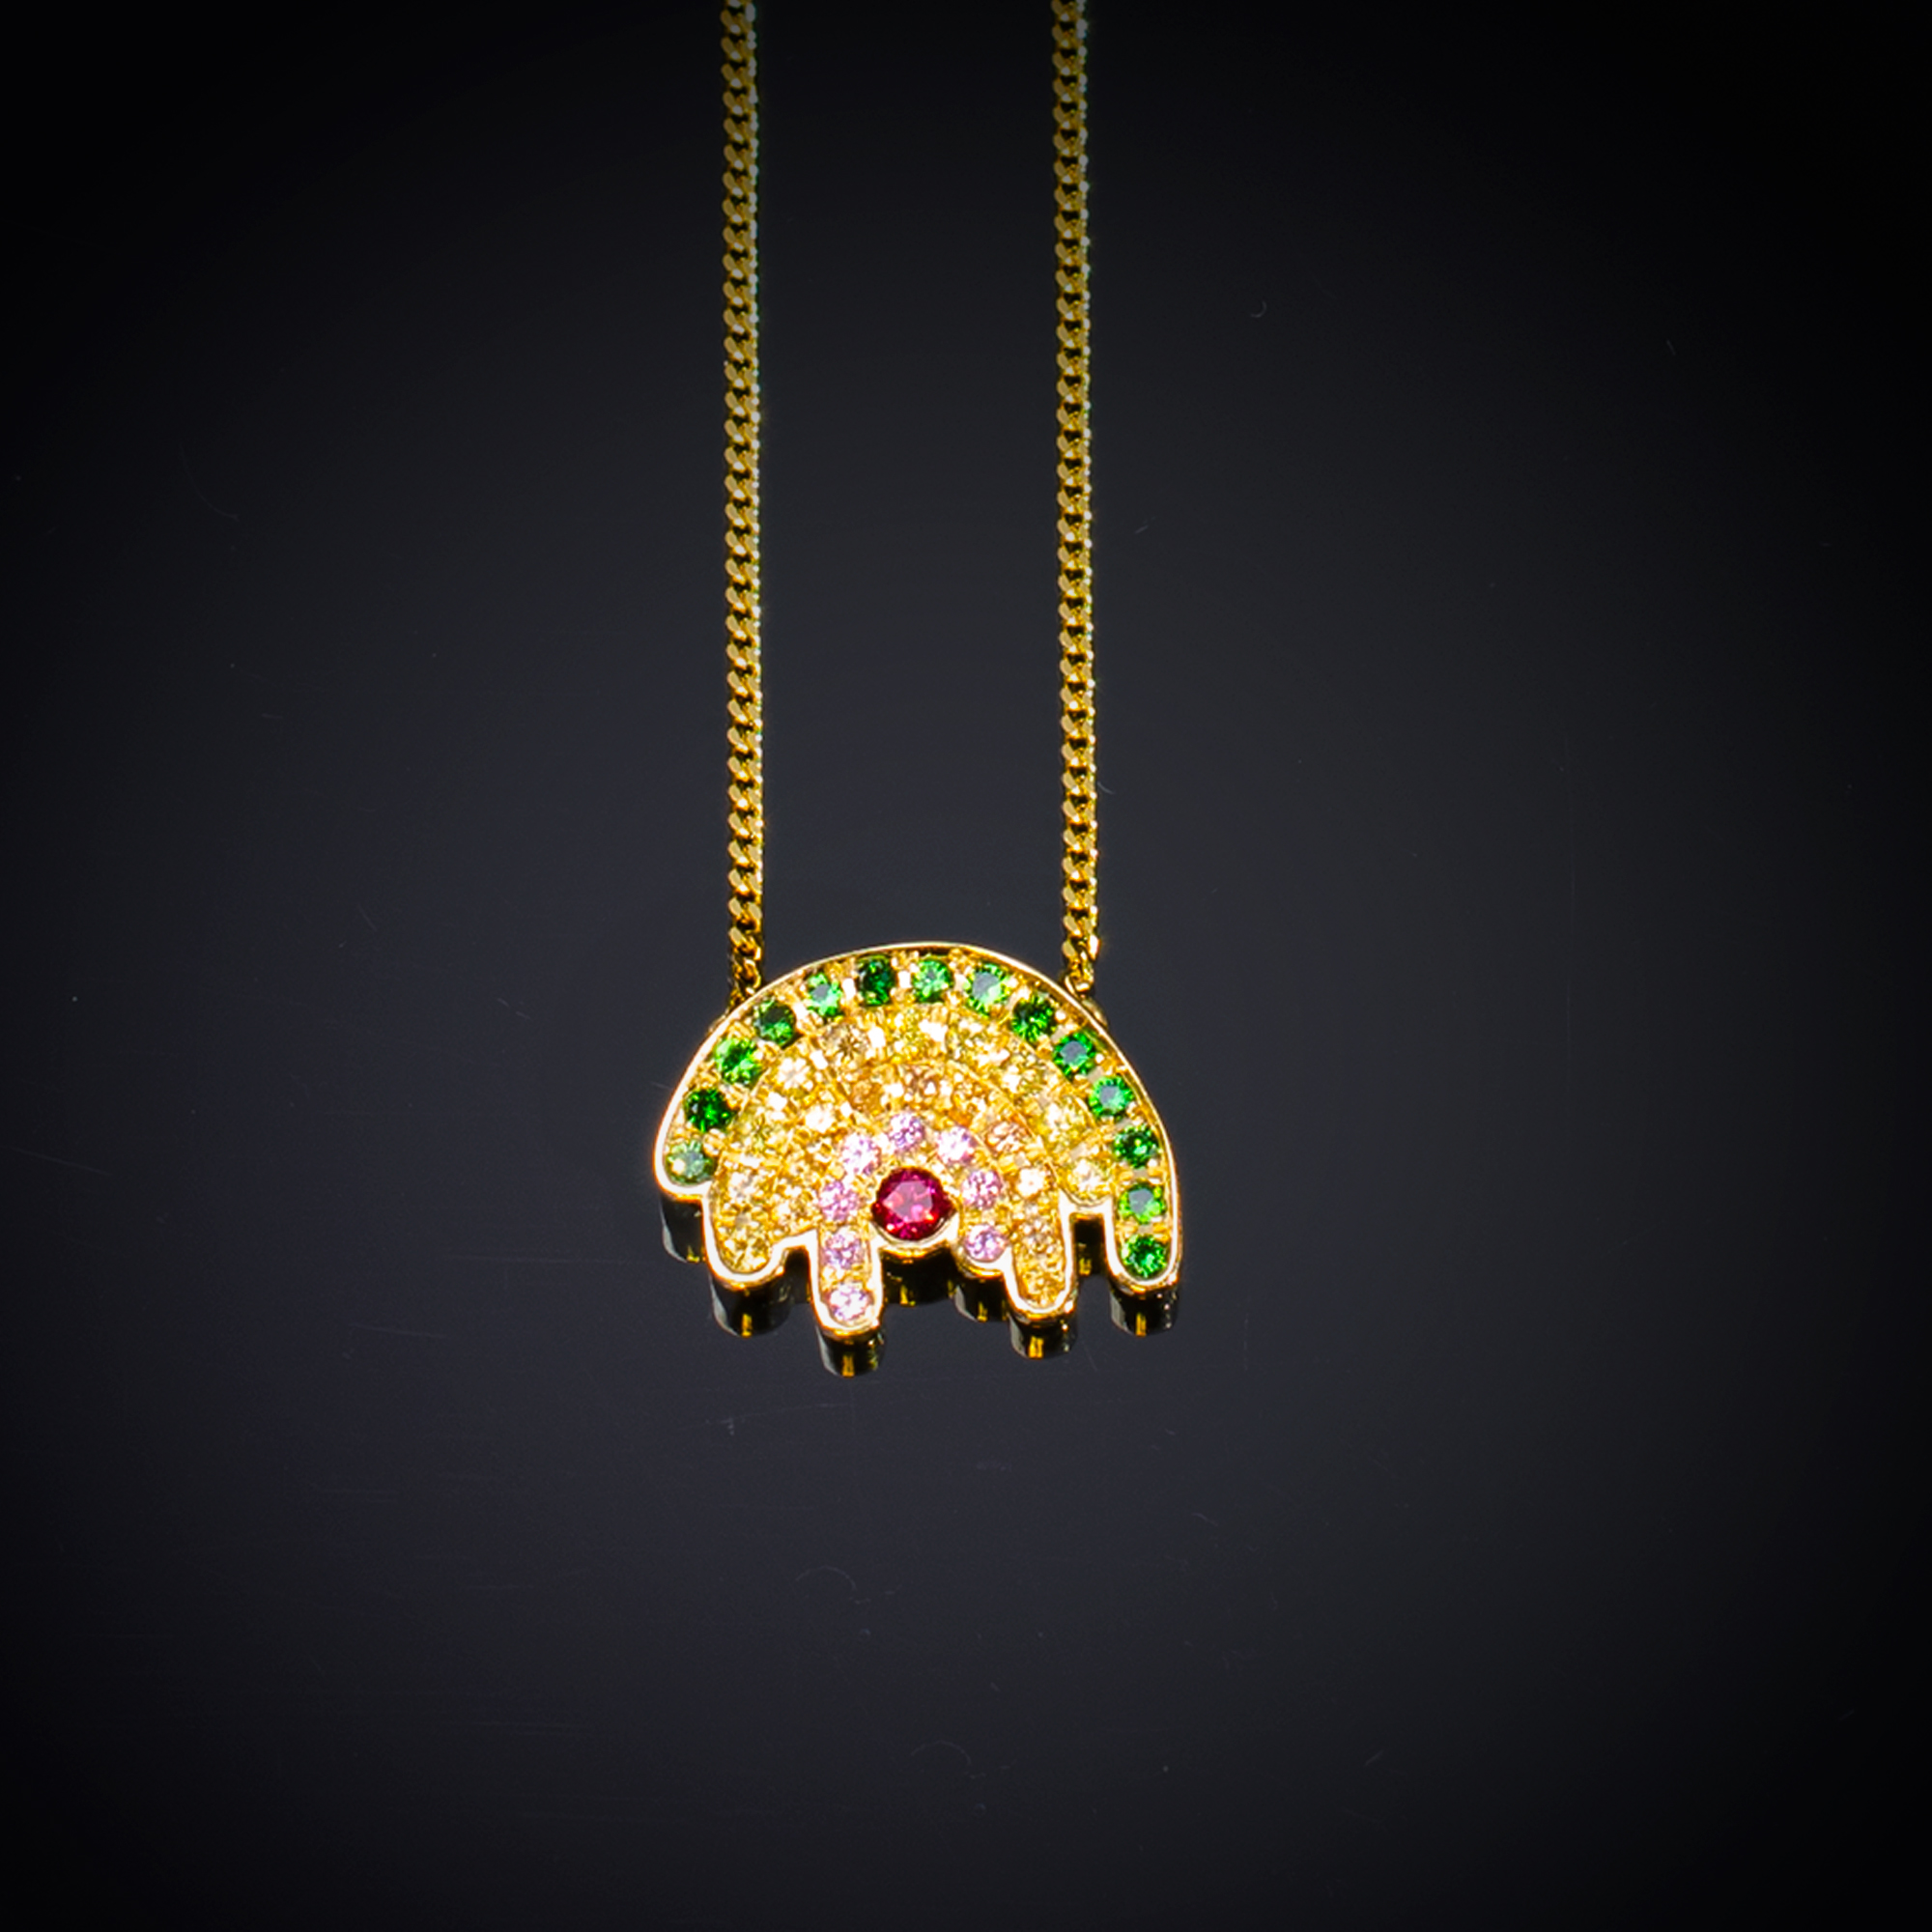 18K yellow gold Rainbow necklace with Ruby, pink, orange and yellow Sapphires and Tsavorite Garnets